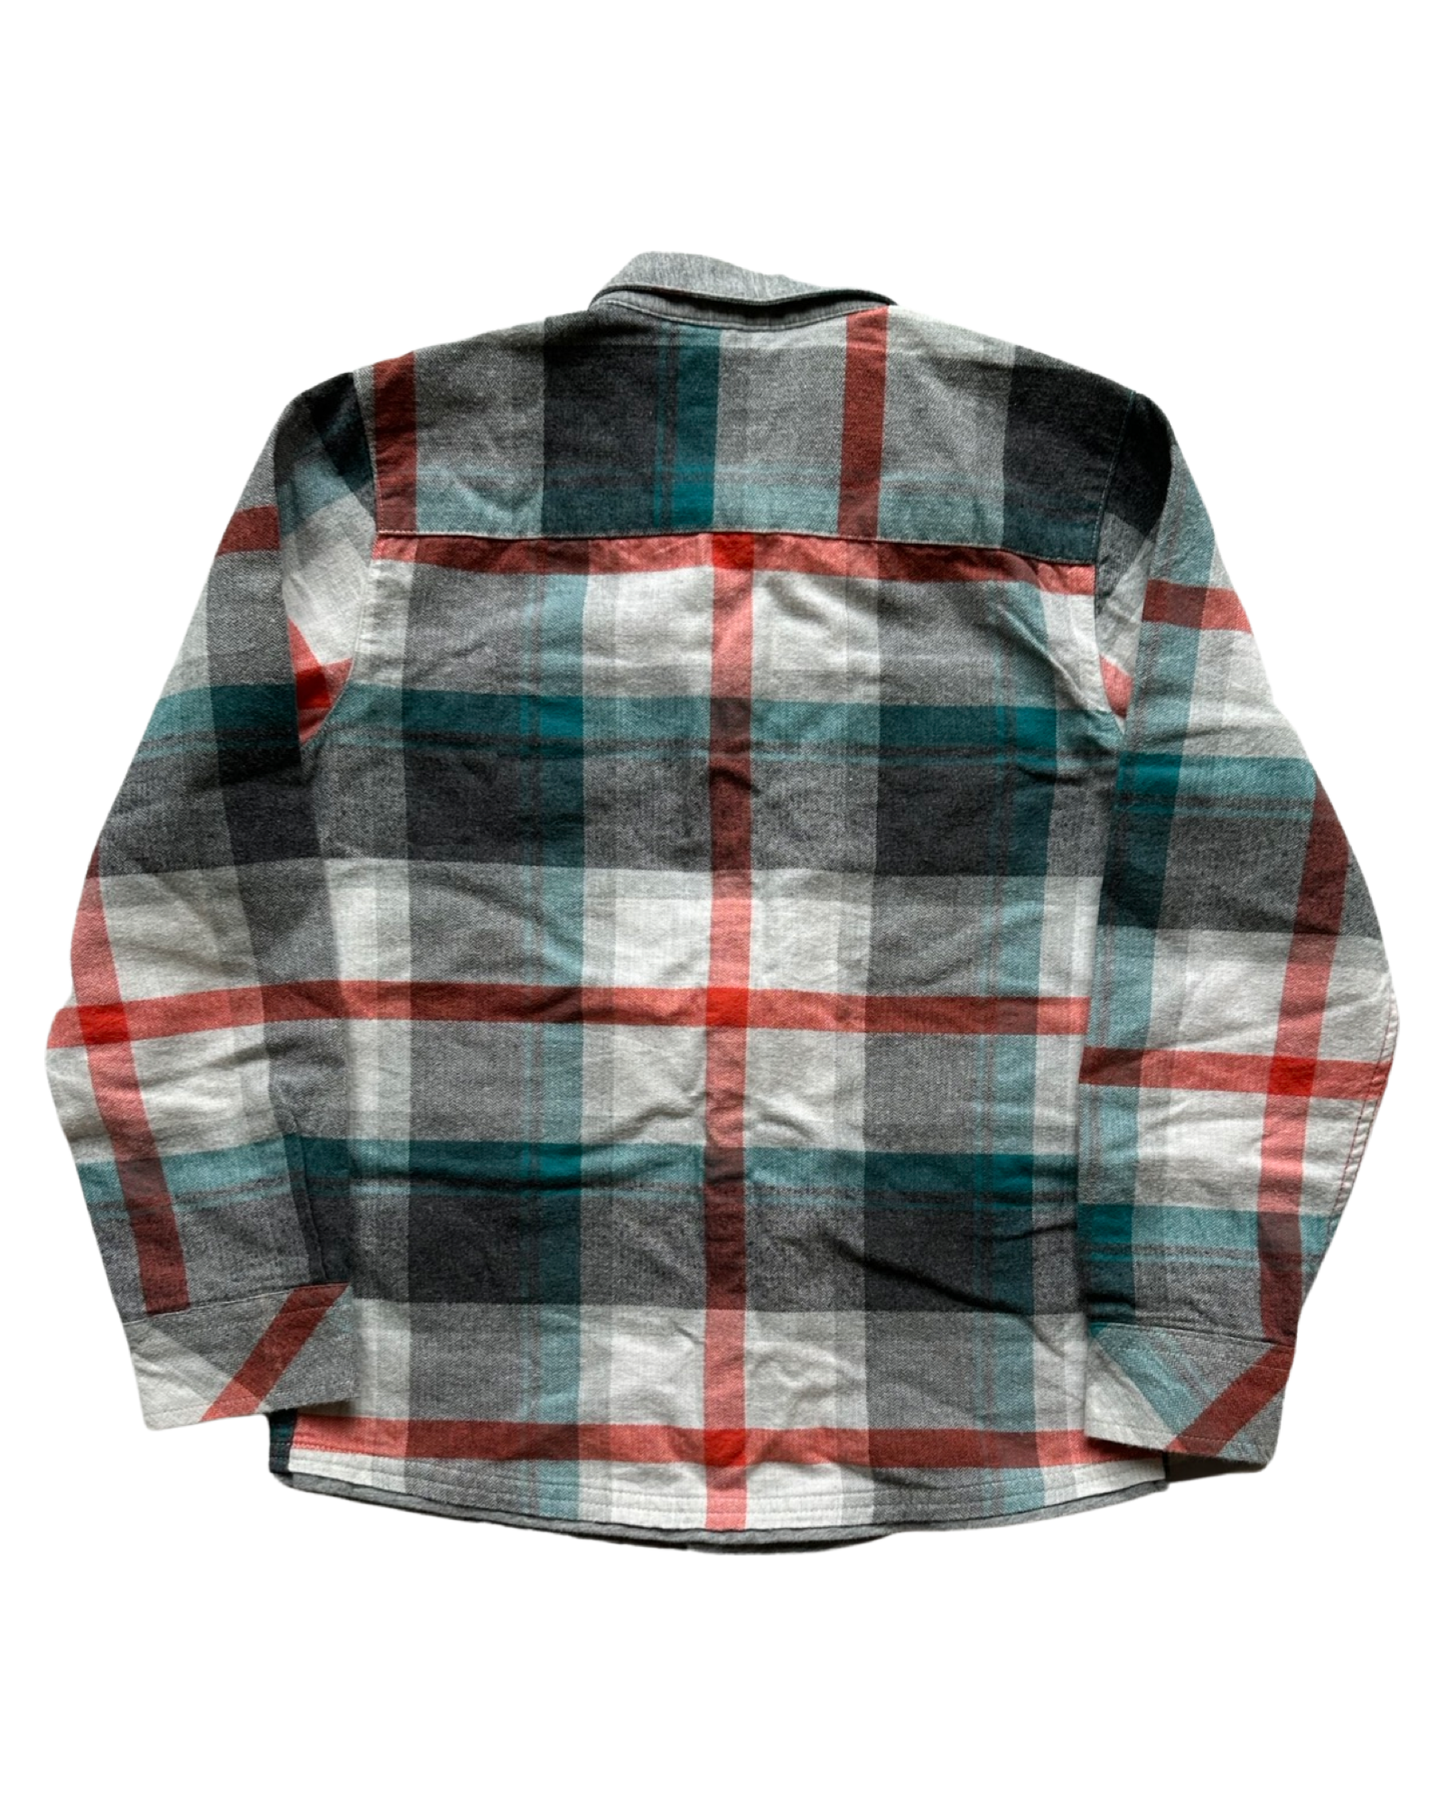 Ted Baker brushed cotton checked shirt (size 7-8yrs)